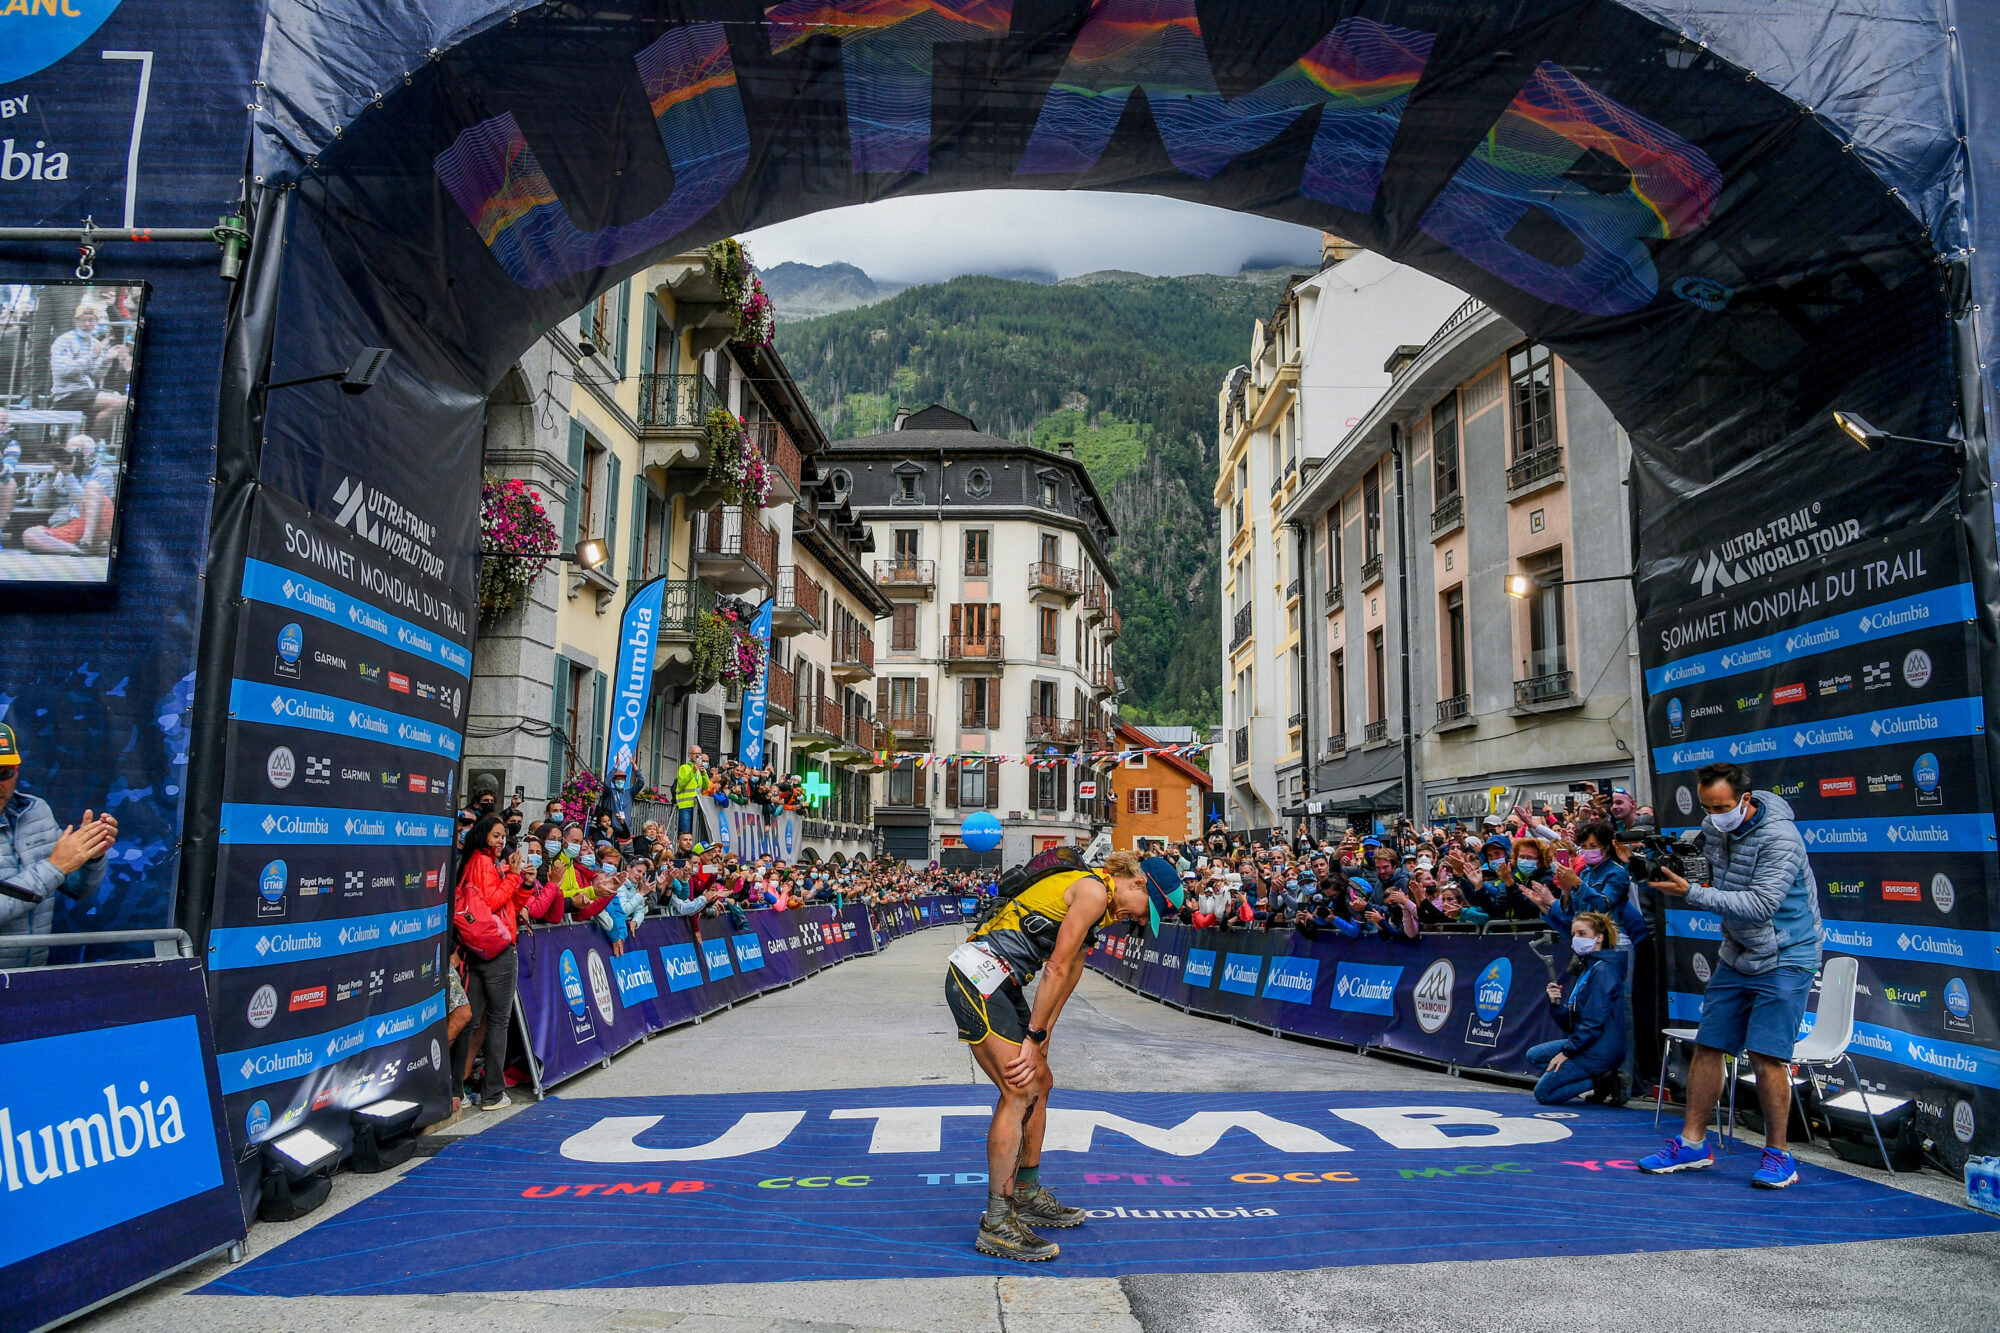 2022 - Story Dacia - the UTMB Mont-Blanc race is the ultimate test